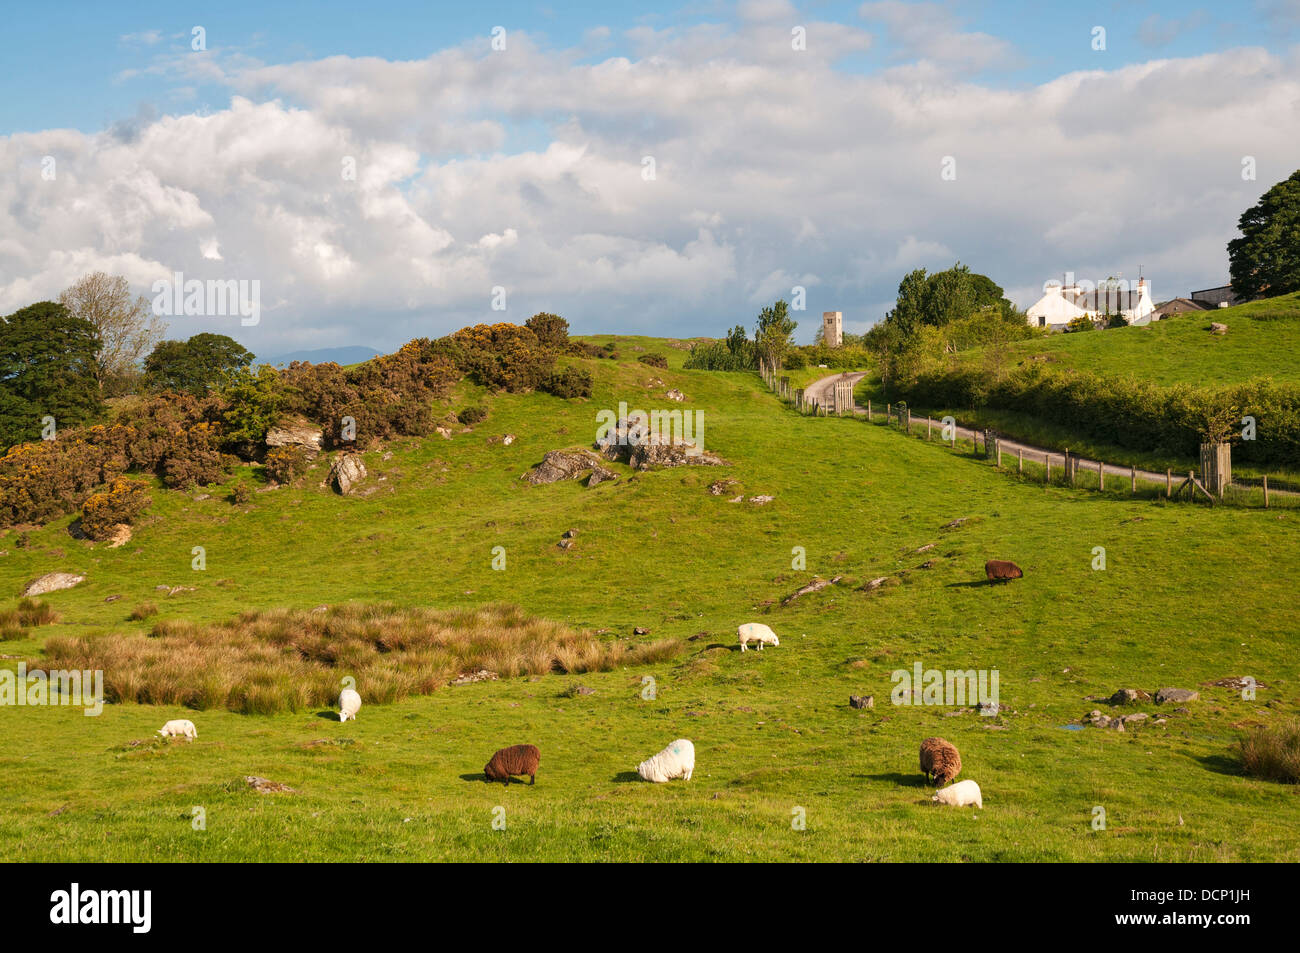 Great Britain, England, Cumbria, Lake District, Crook, Crook Hall Farm Bed and Breakfast, working sheep cattle farm Stock Photo